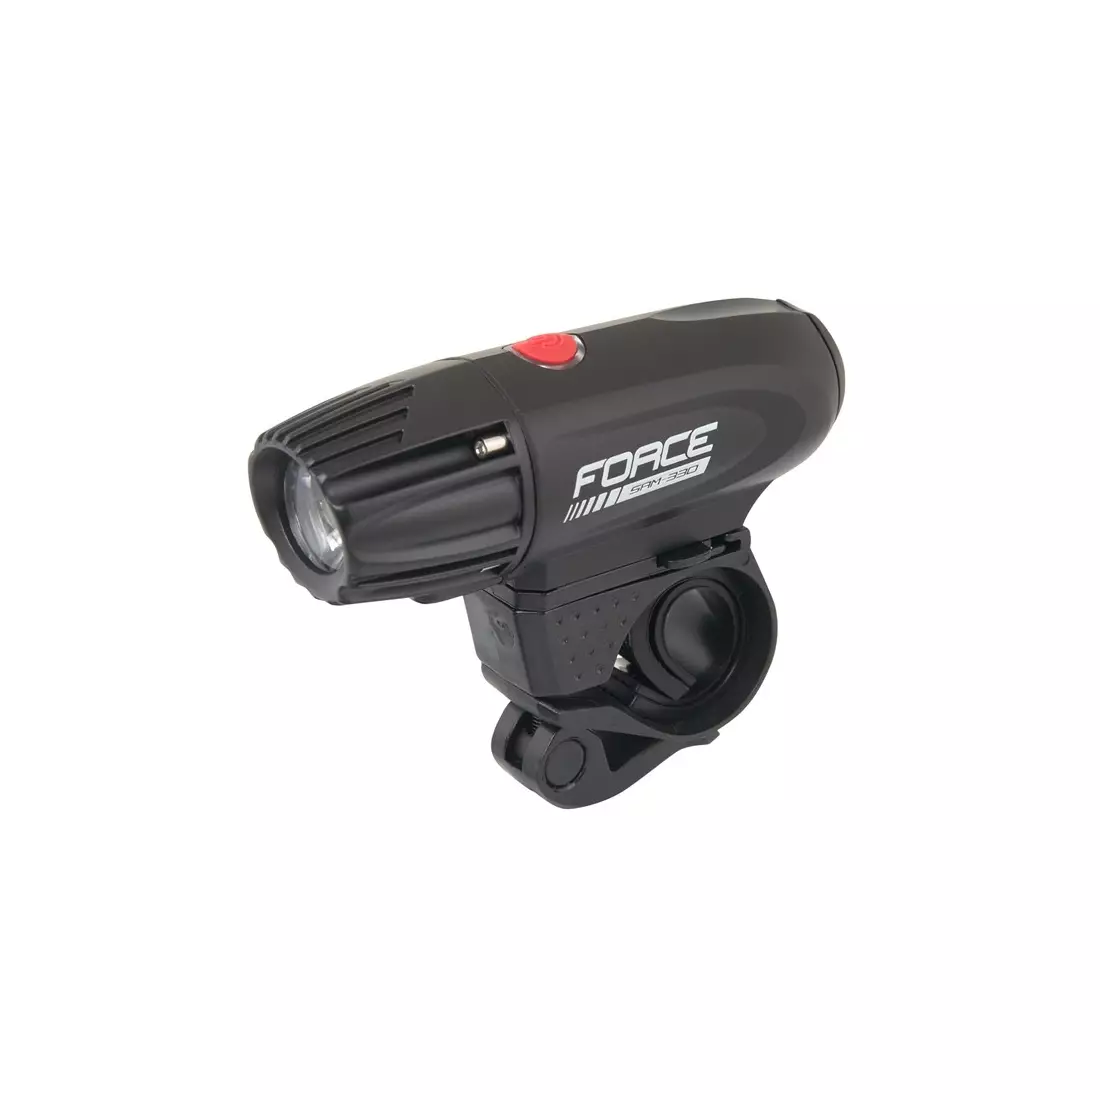 FORCE 45205 SAM 330 CREE XM-L front bicycle light 330 lumens